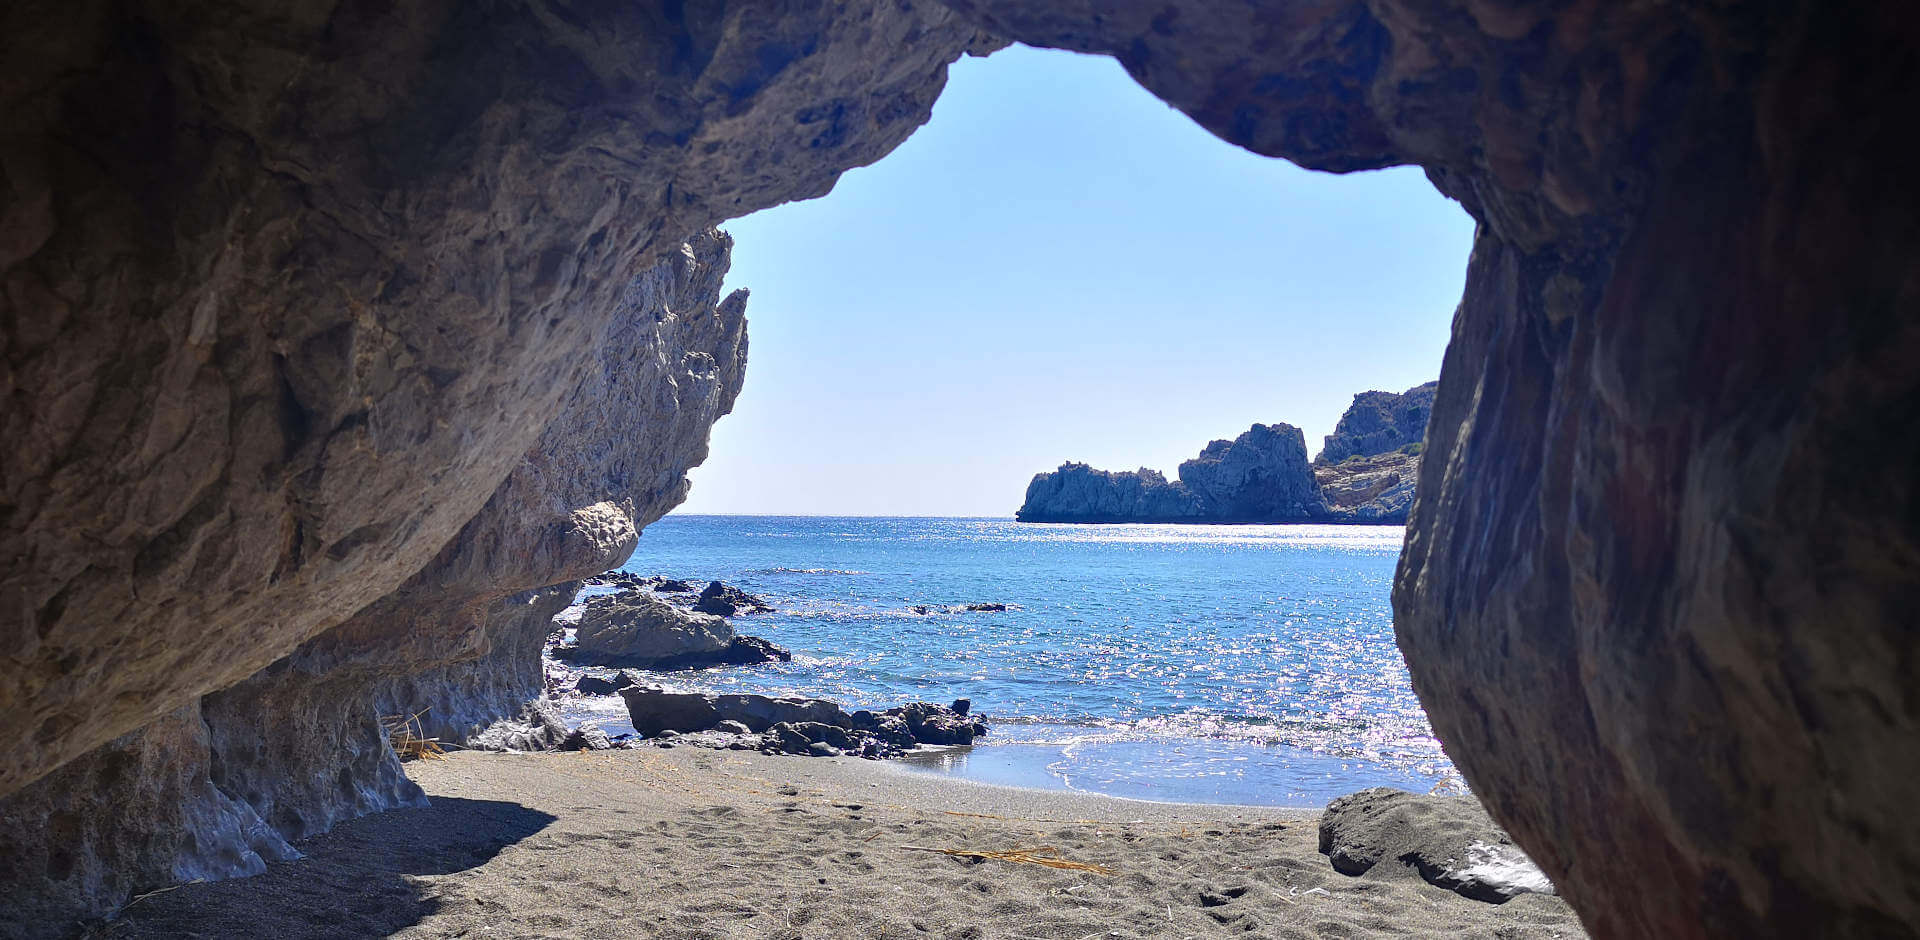 The secret beach just below Yoga Rocks Crete looking out to the sleepy dragon